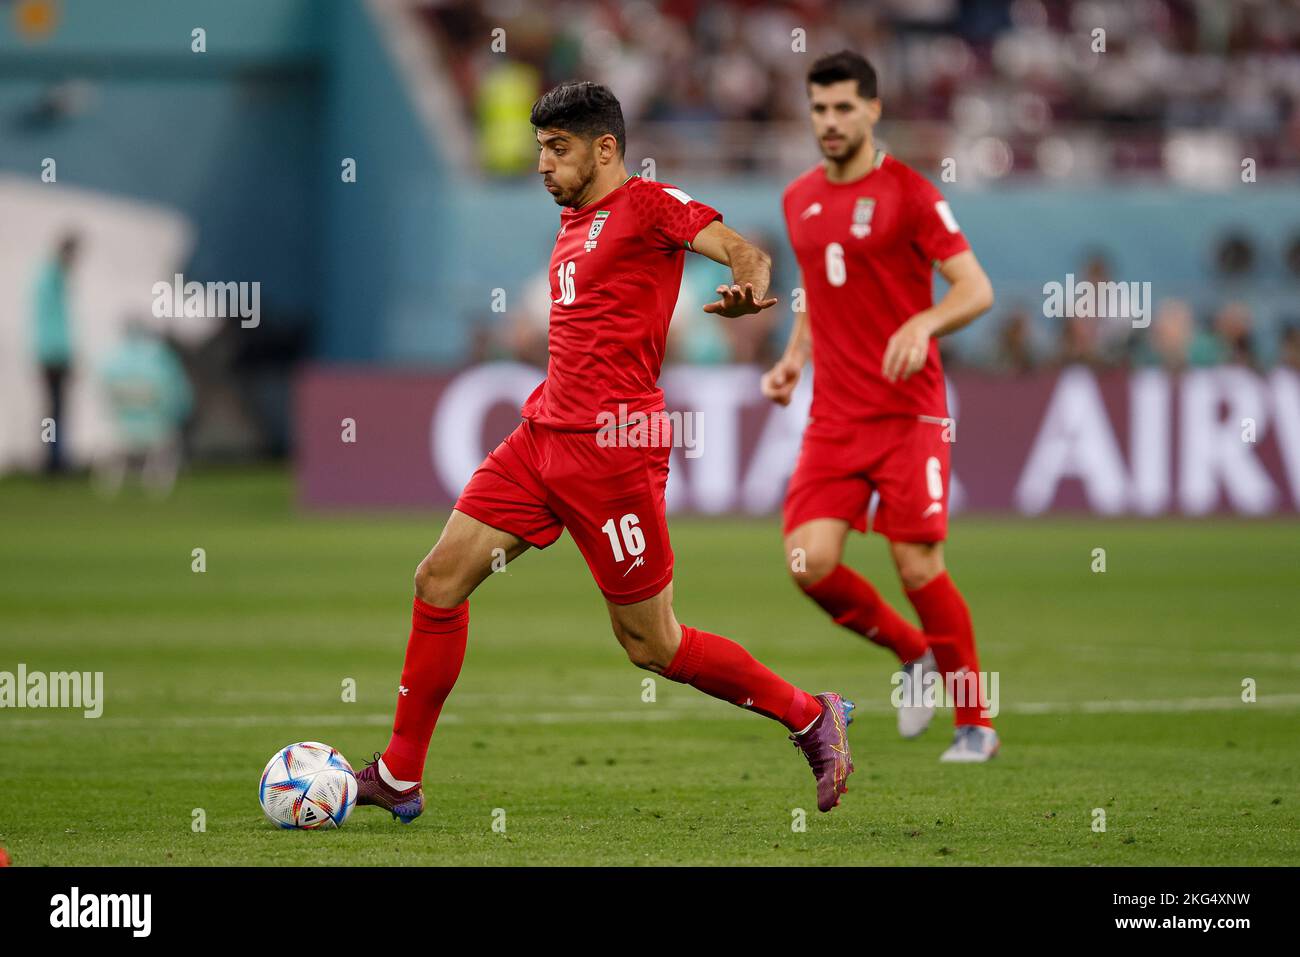 Doha, Catar. 21st Nov, 2022. TORABI Mehdi of Iran during a match between England and Iran, valid for the group stage of the World Cup, held at Khalifa International Stadium in Doha, Qatar. Credit: Marcelo Machado de Melo/FotoArena/Alamy Live News Stock Photo